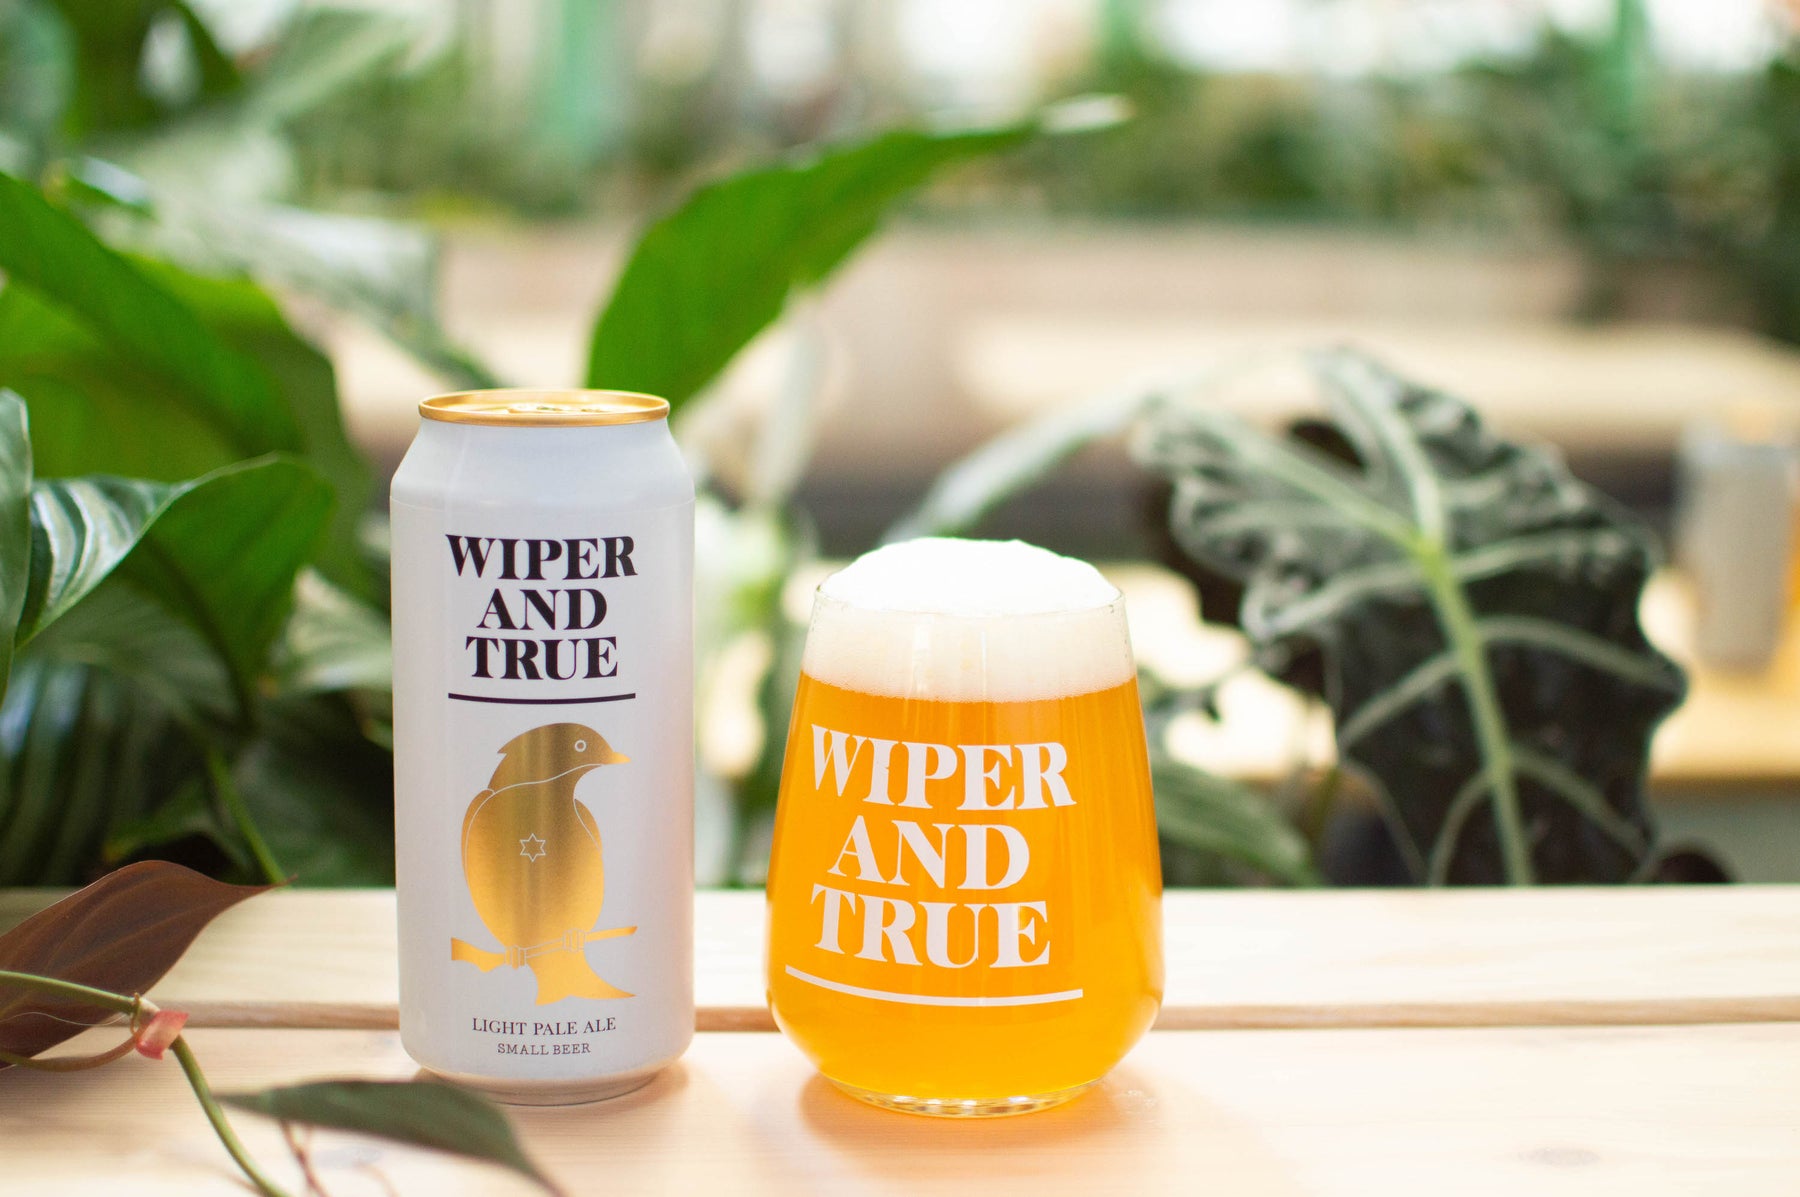 Wiper and True Small Beer Light Pale Ale, can and glass view